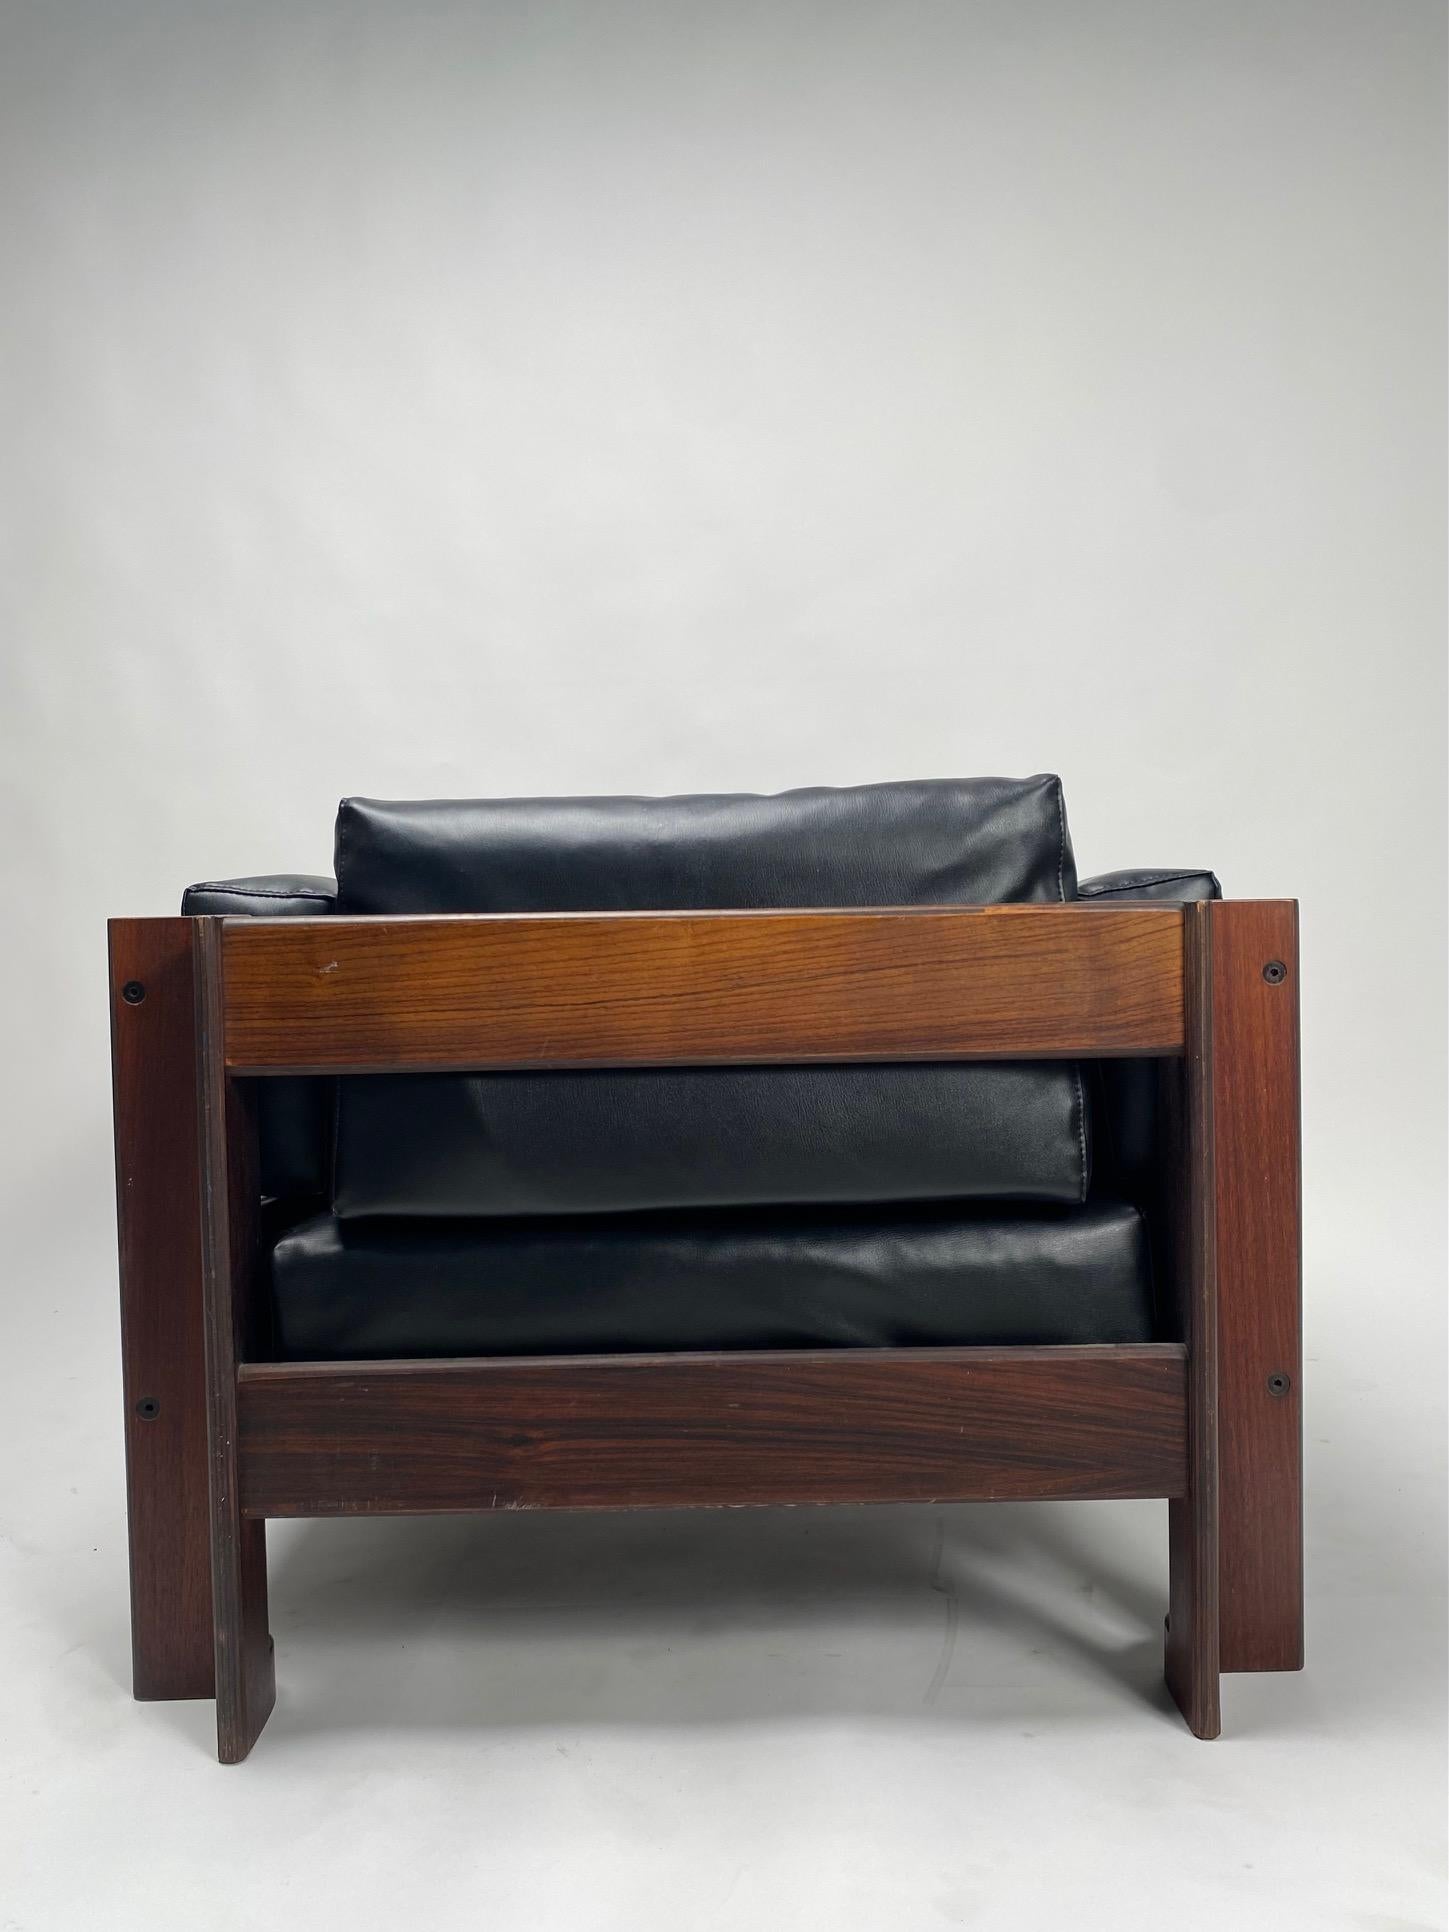 Wood 'Zelda' Armchair by Sergio Asti for Poltrona, Italy, 1962 For Sale